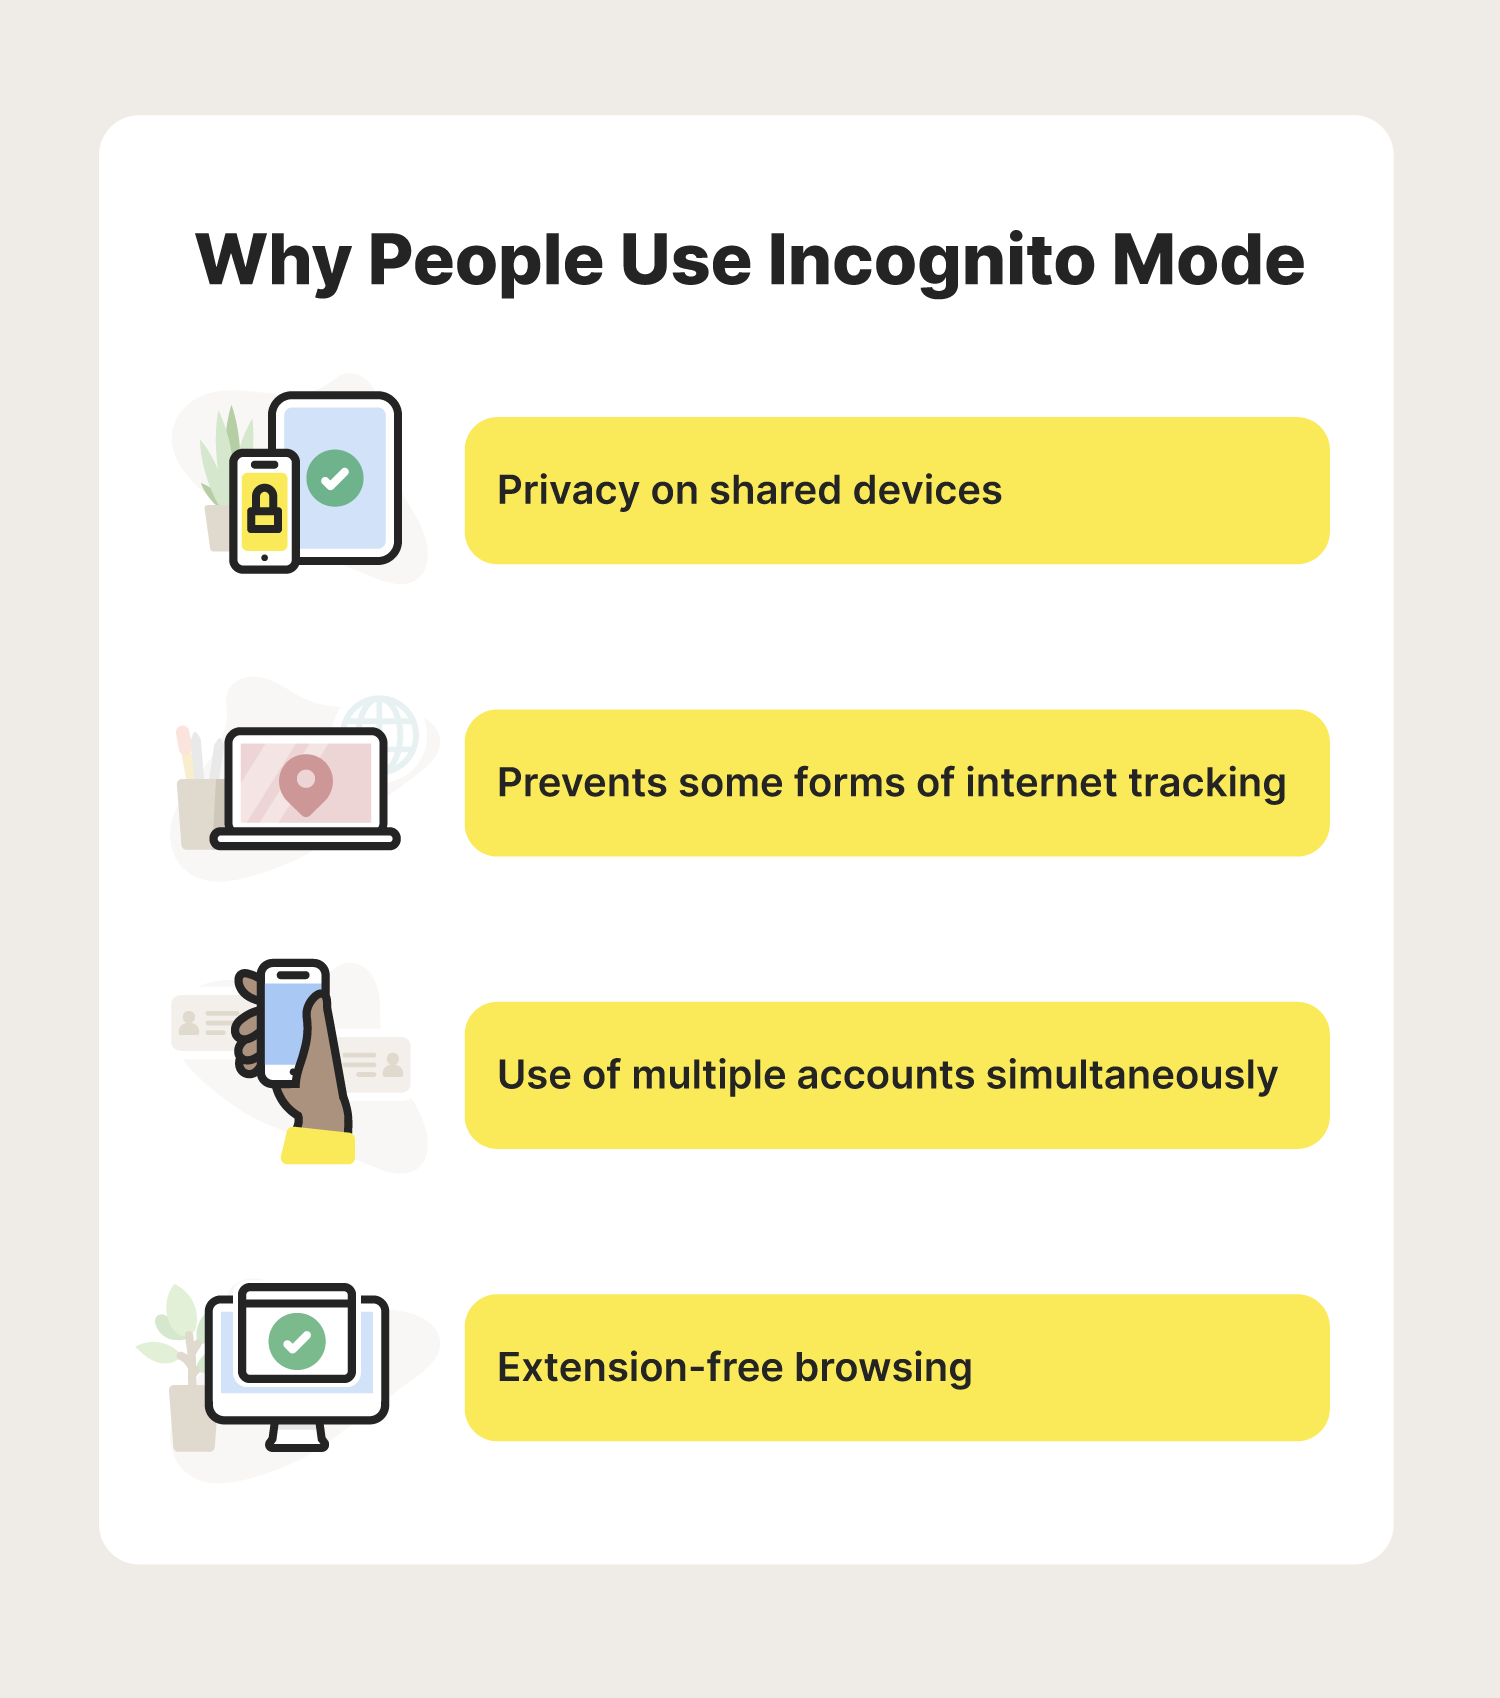 Why people use incognito mode